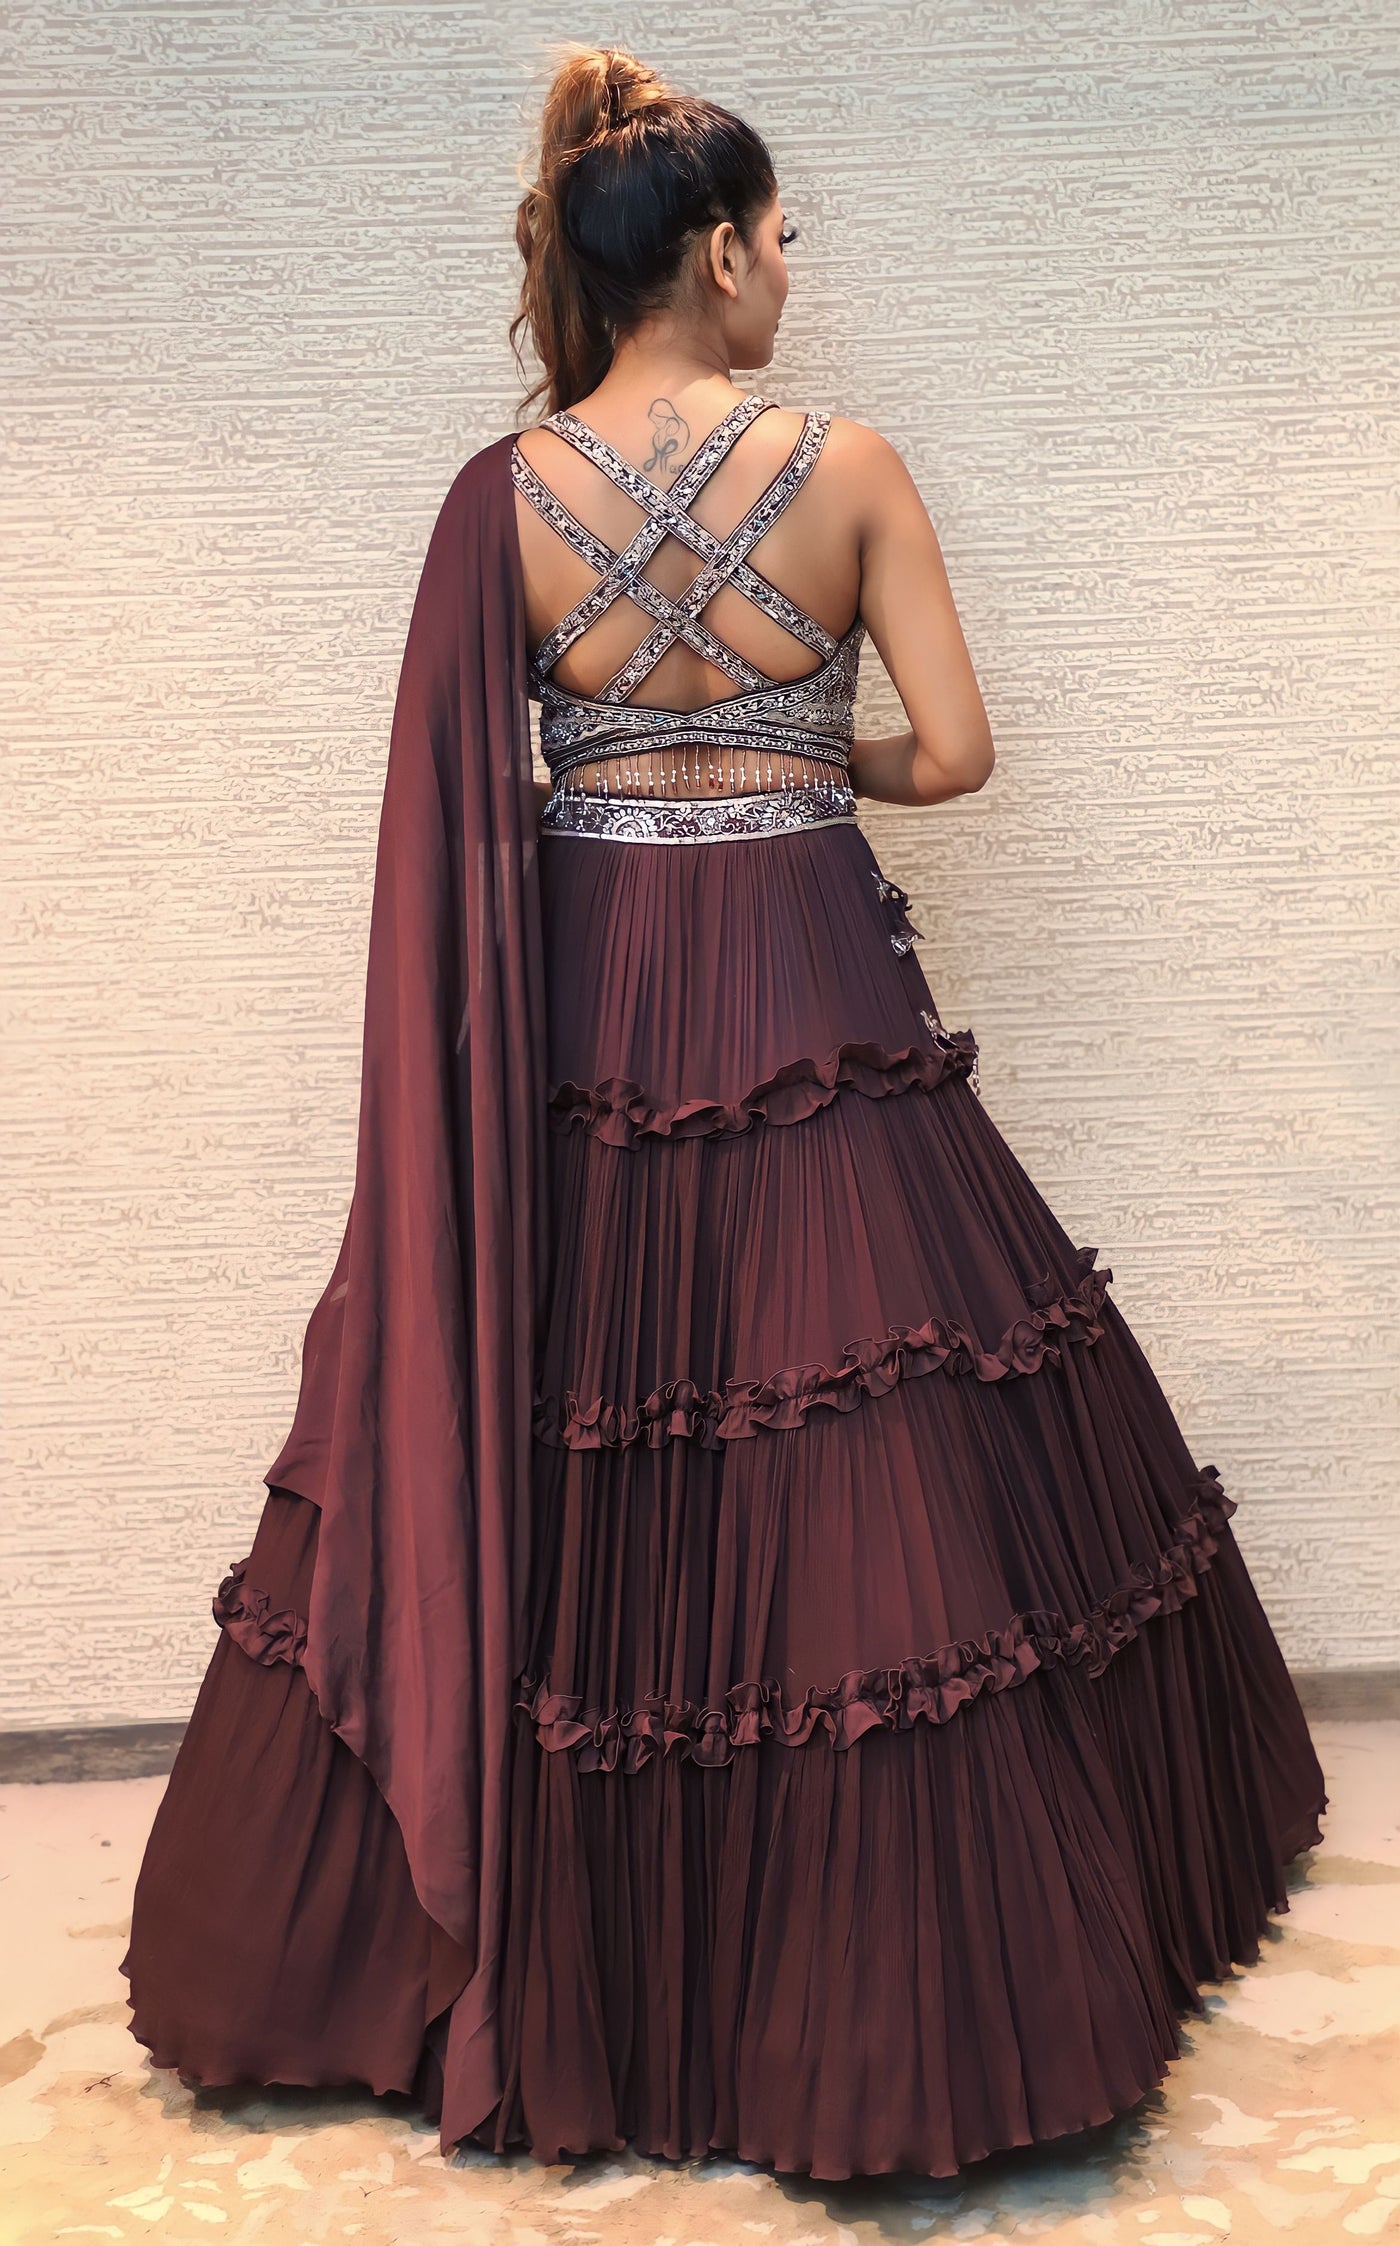 trendy wine color floral motif embroidered lehenga